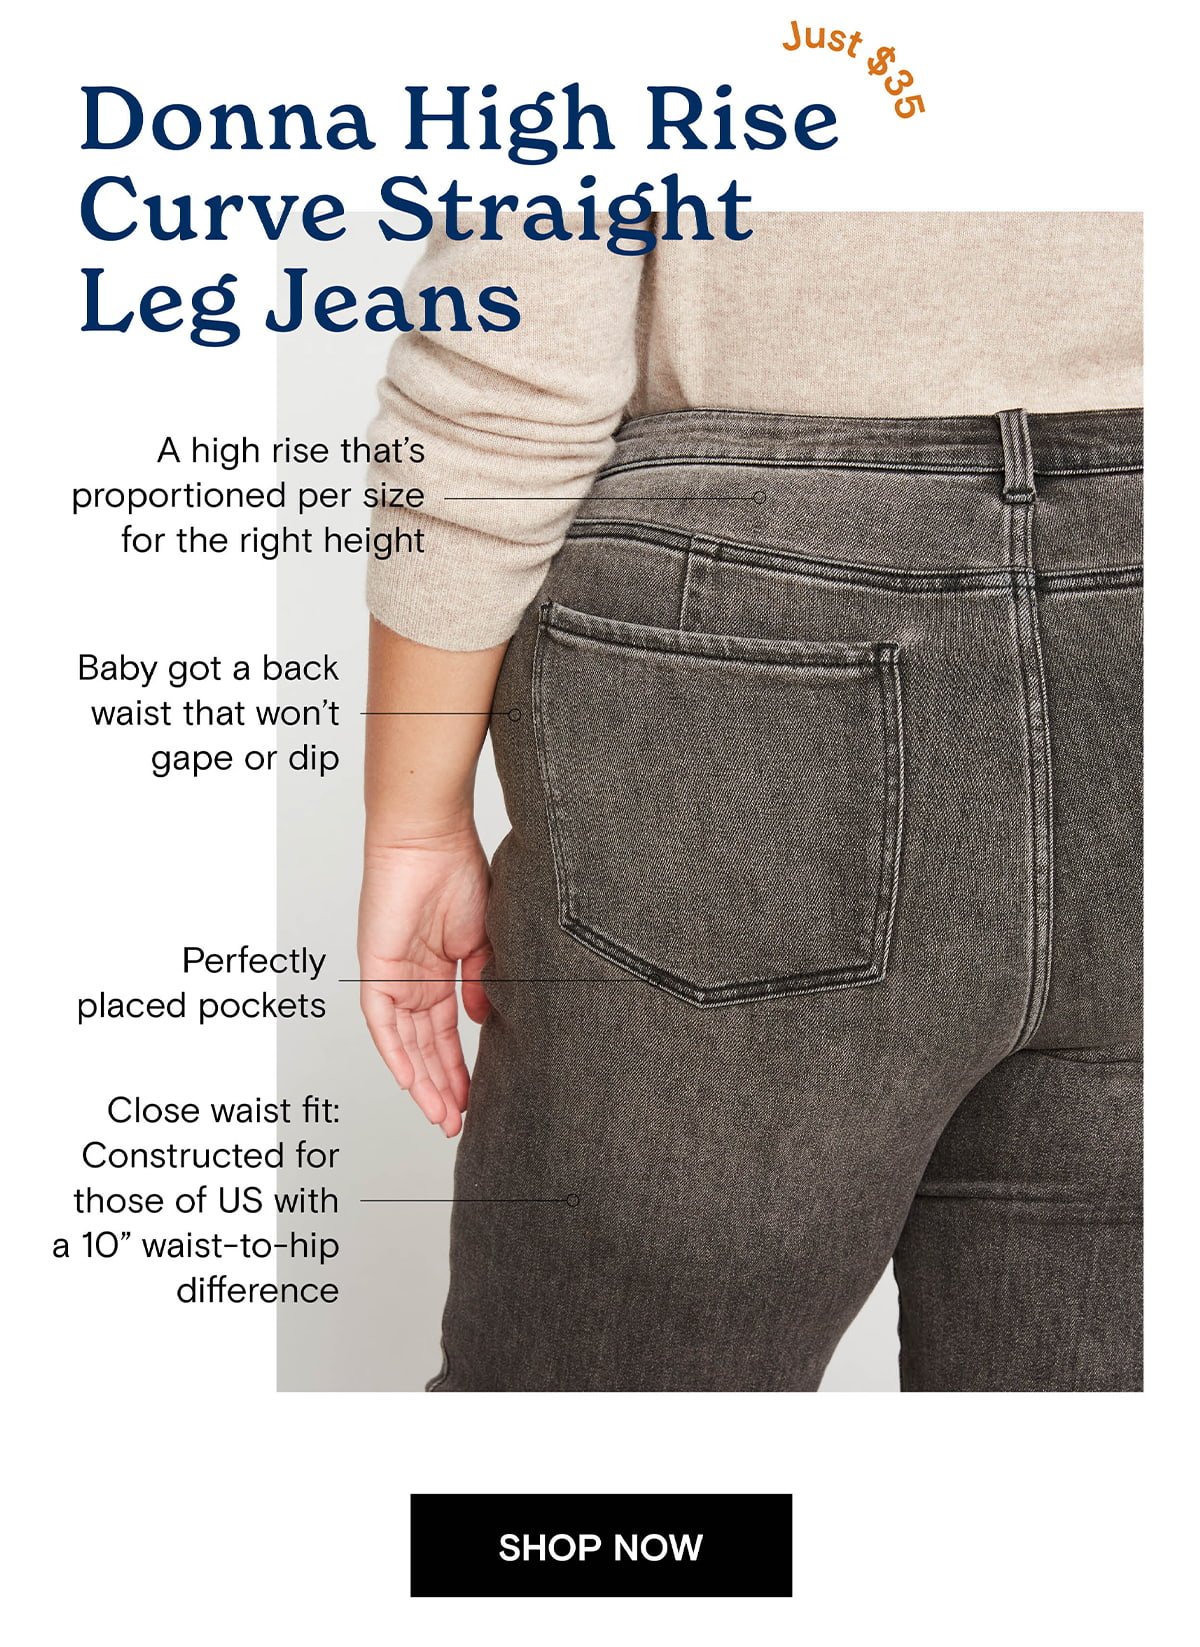 Get the Donna High Rise Curve Straight Jeans for $35